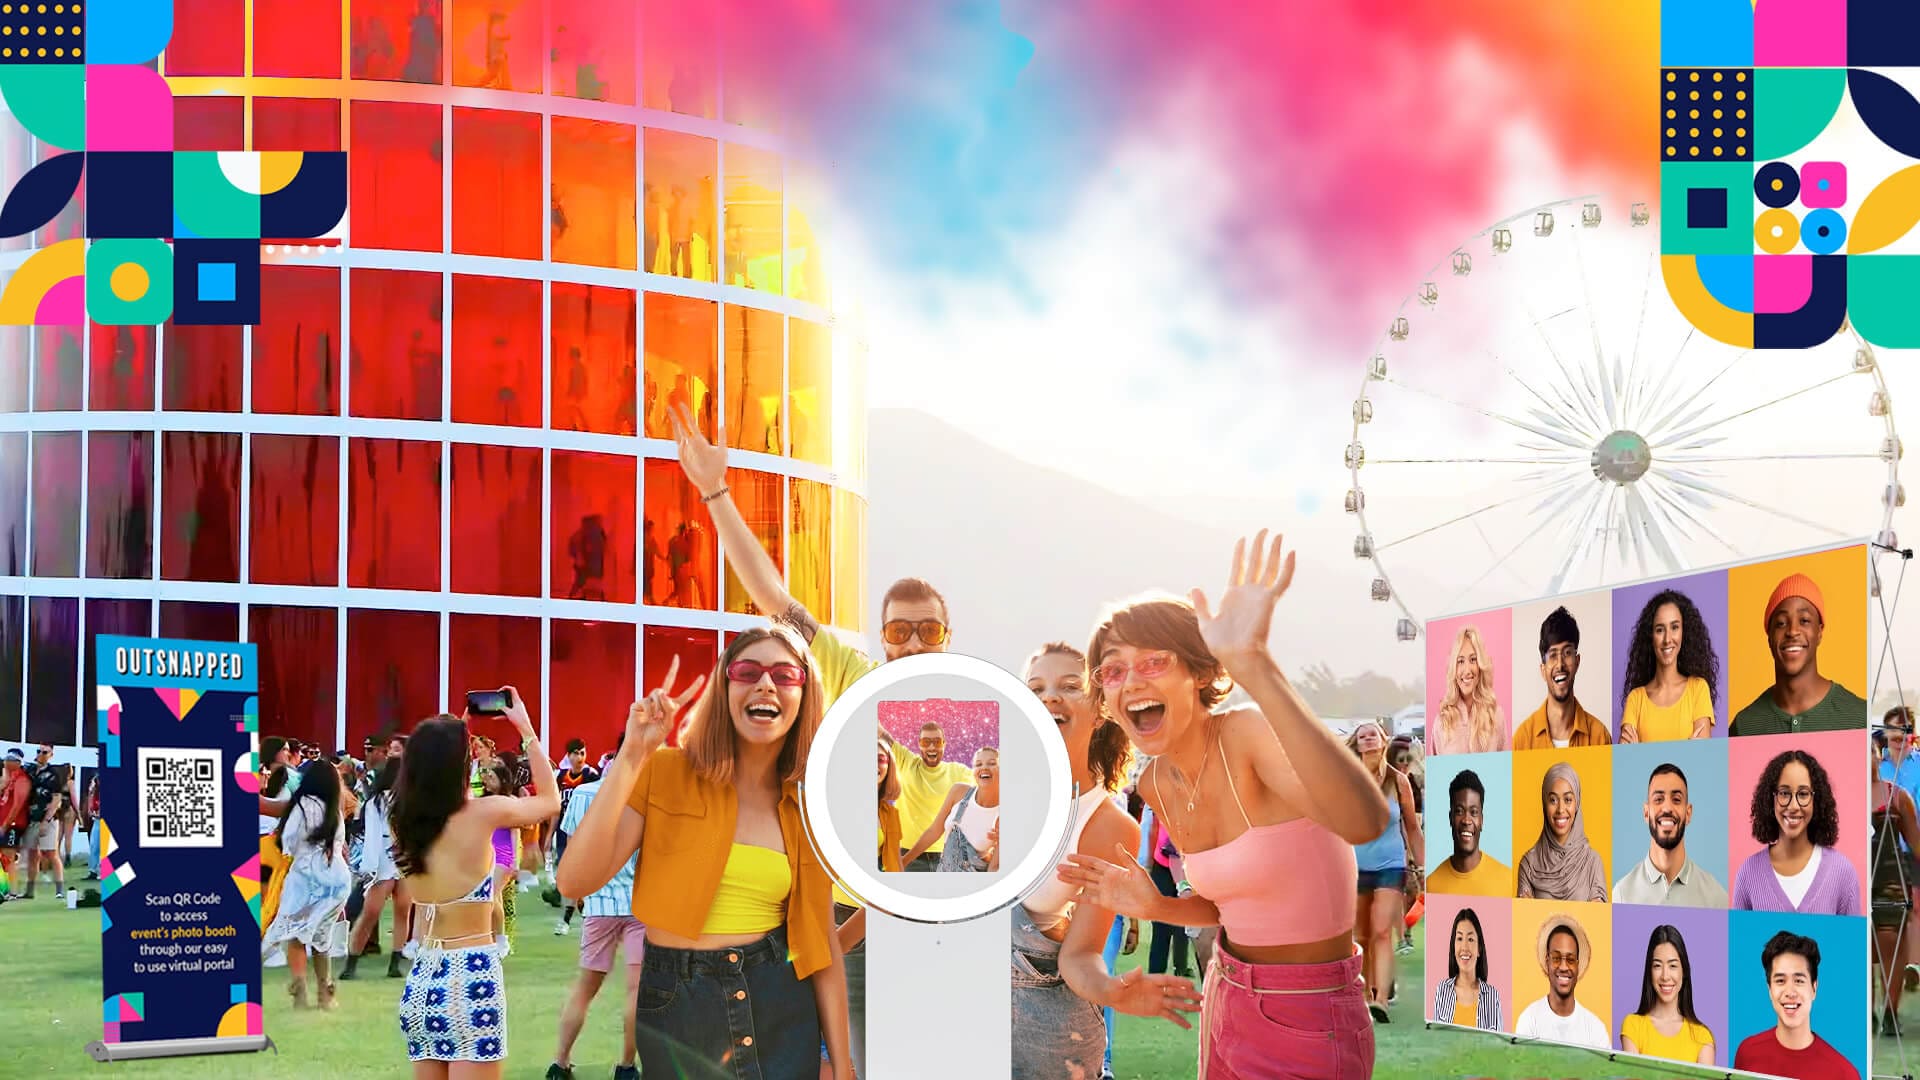 A vibrant collage of summer event elements, featuring outdoor venues, diverse attendees, immersive technologies, sustainable practices, and engaging activities.